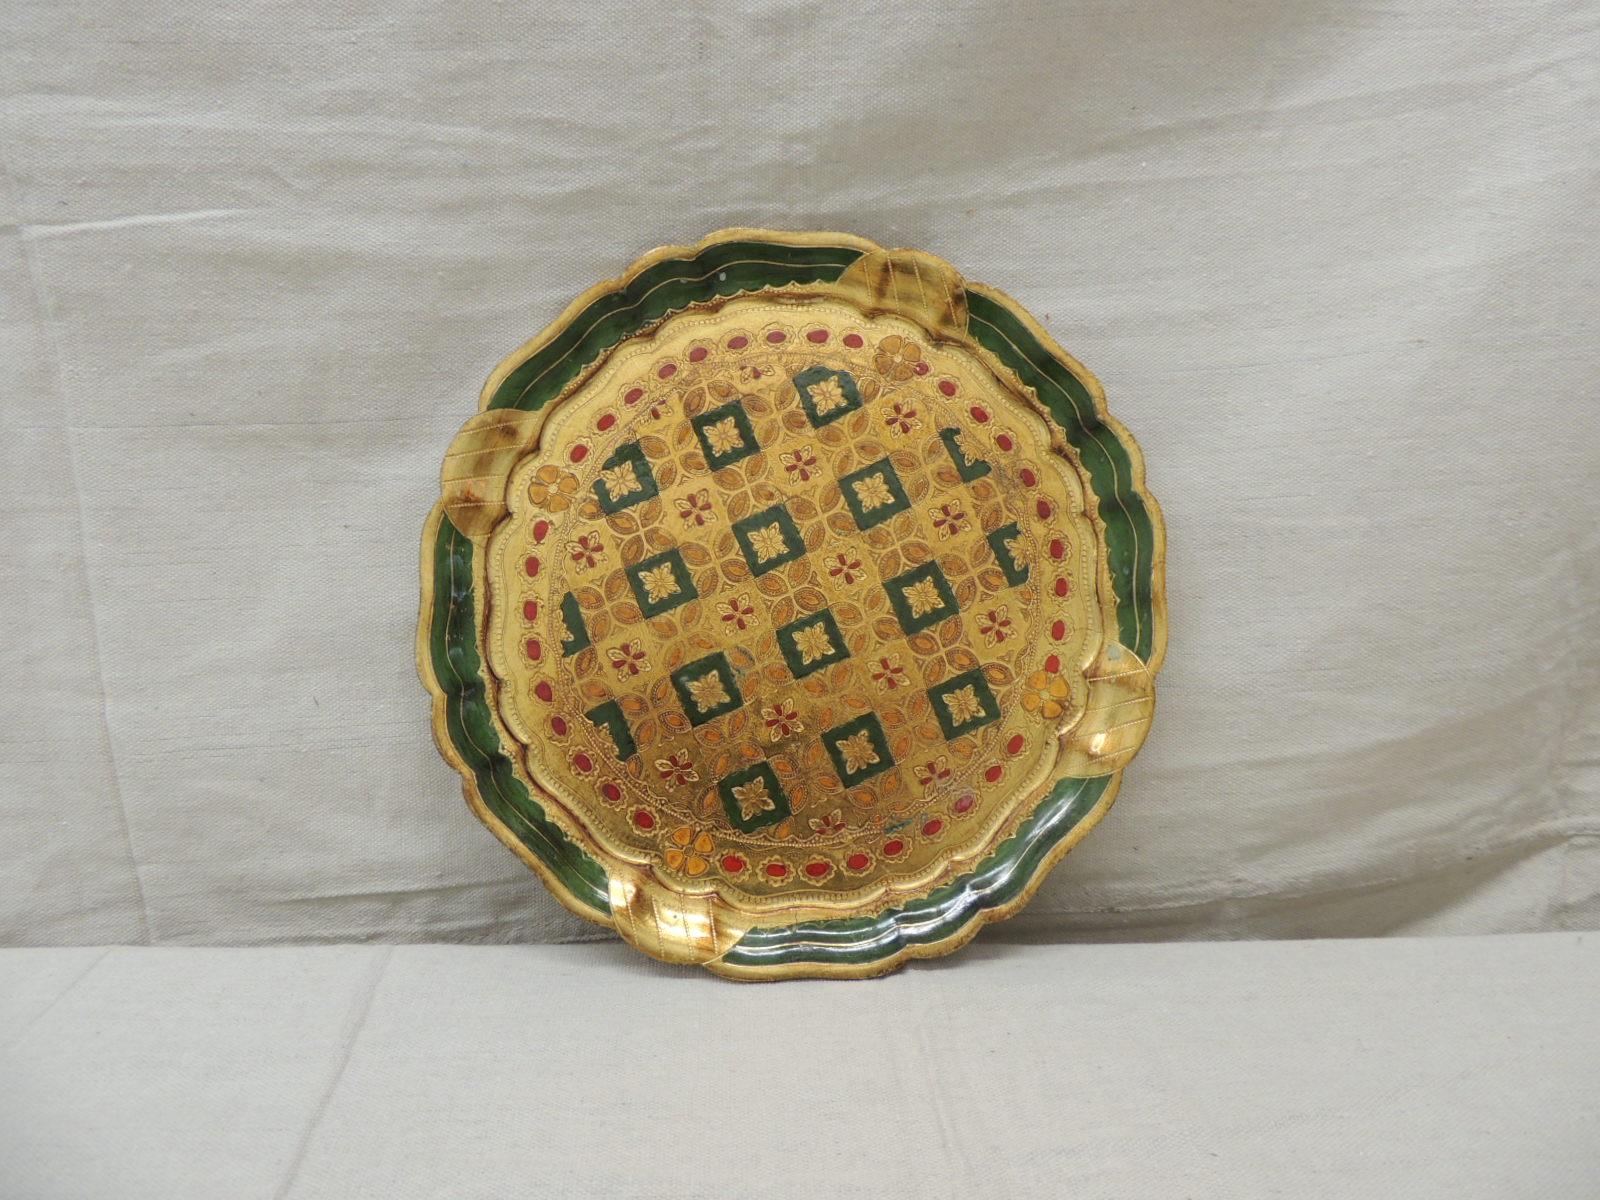 Vintage round green and gold Florentine serving tray
Stamped: C & R Florence.
Scalloped edges
Size: 11.75” D x 0.5” H.
 